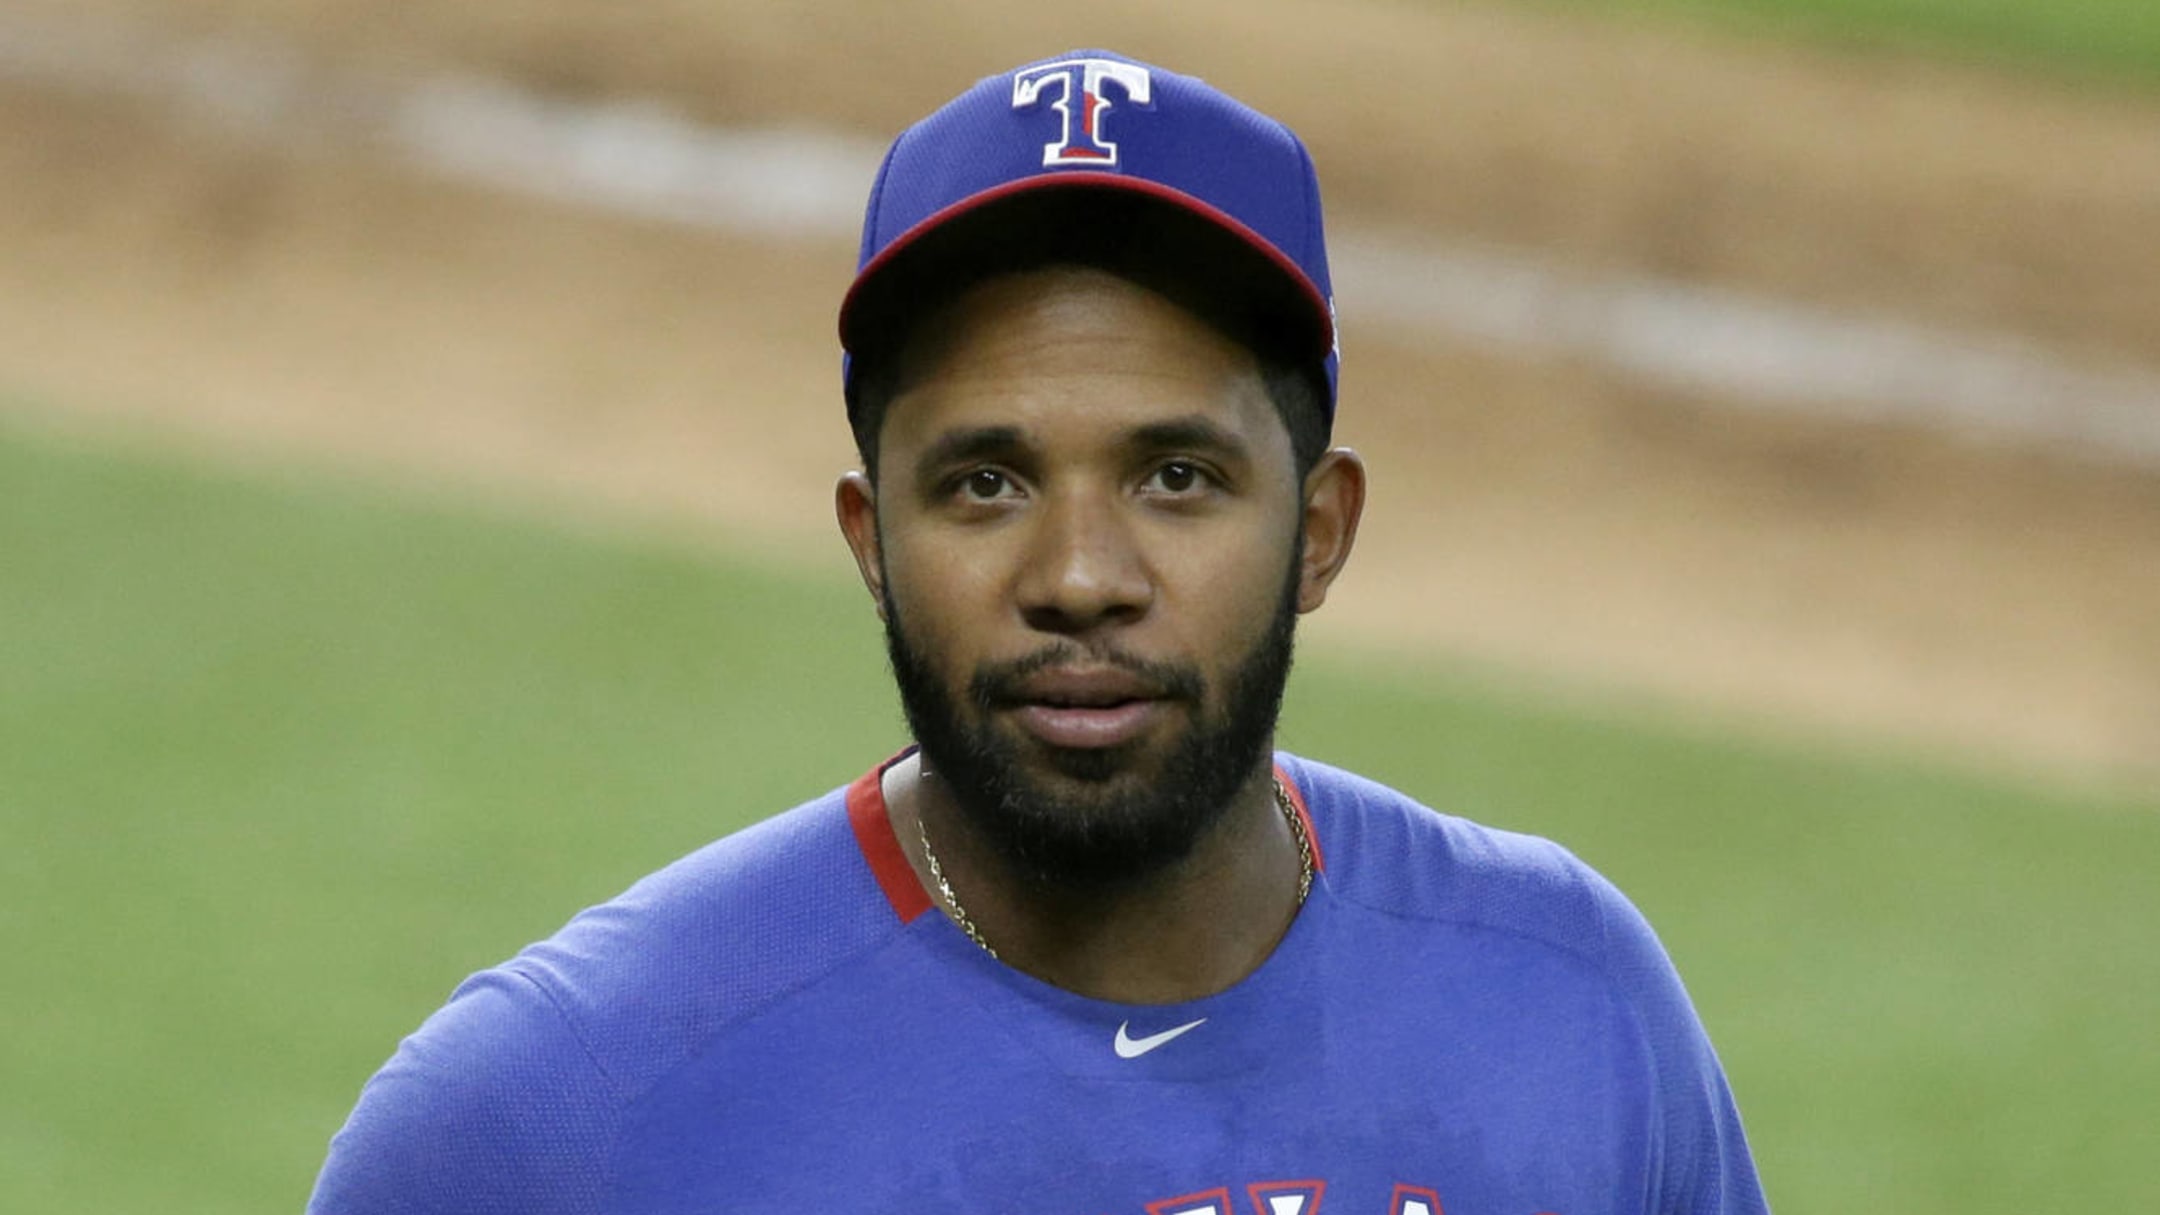 What kind of future exists for shortstop Elvis Andrus with the Texas Rangers ?